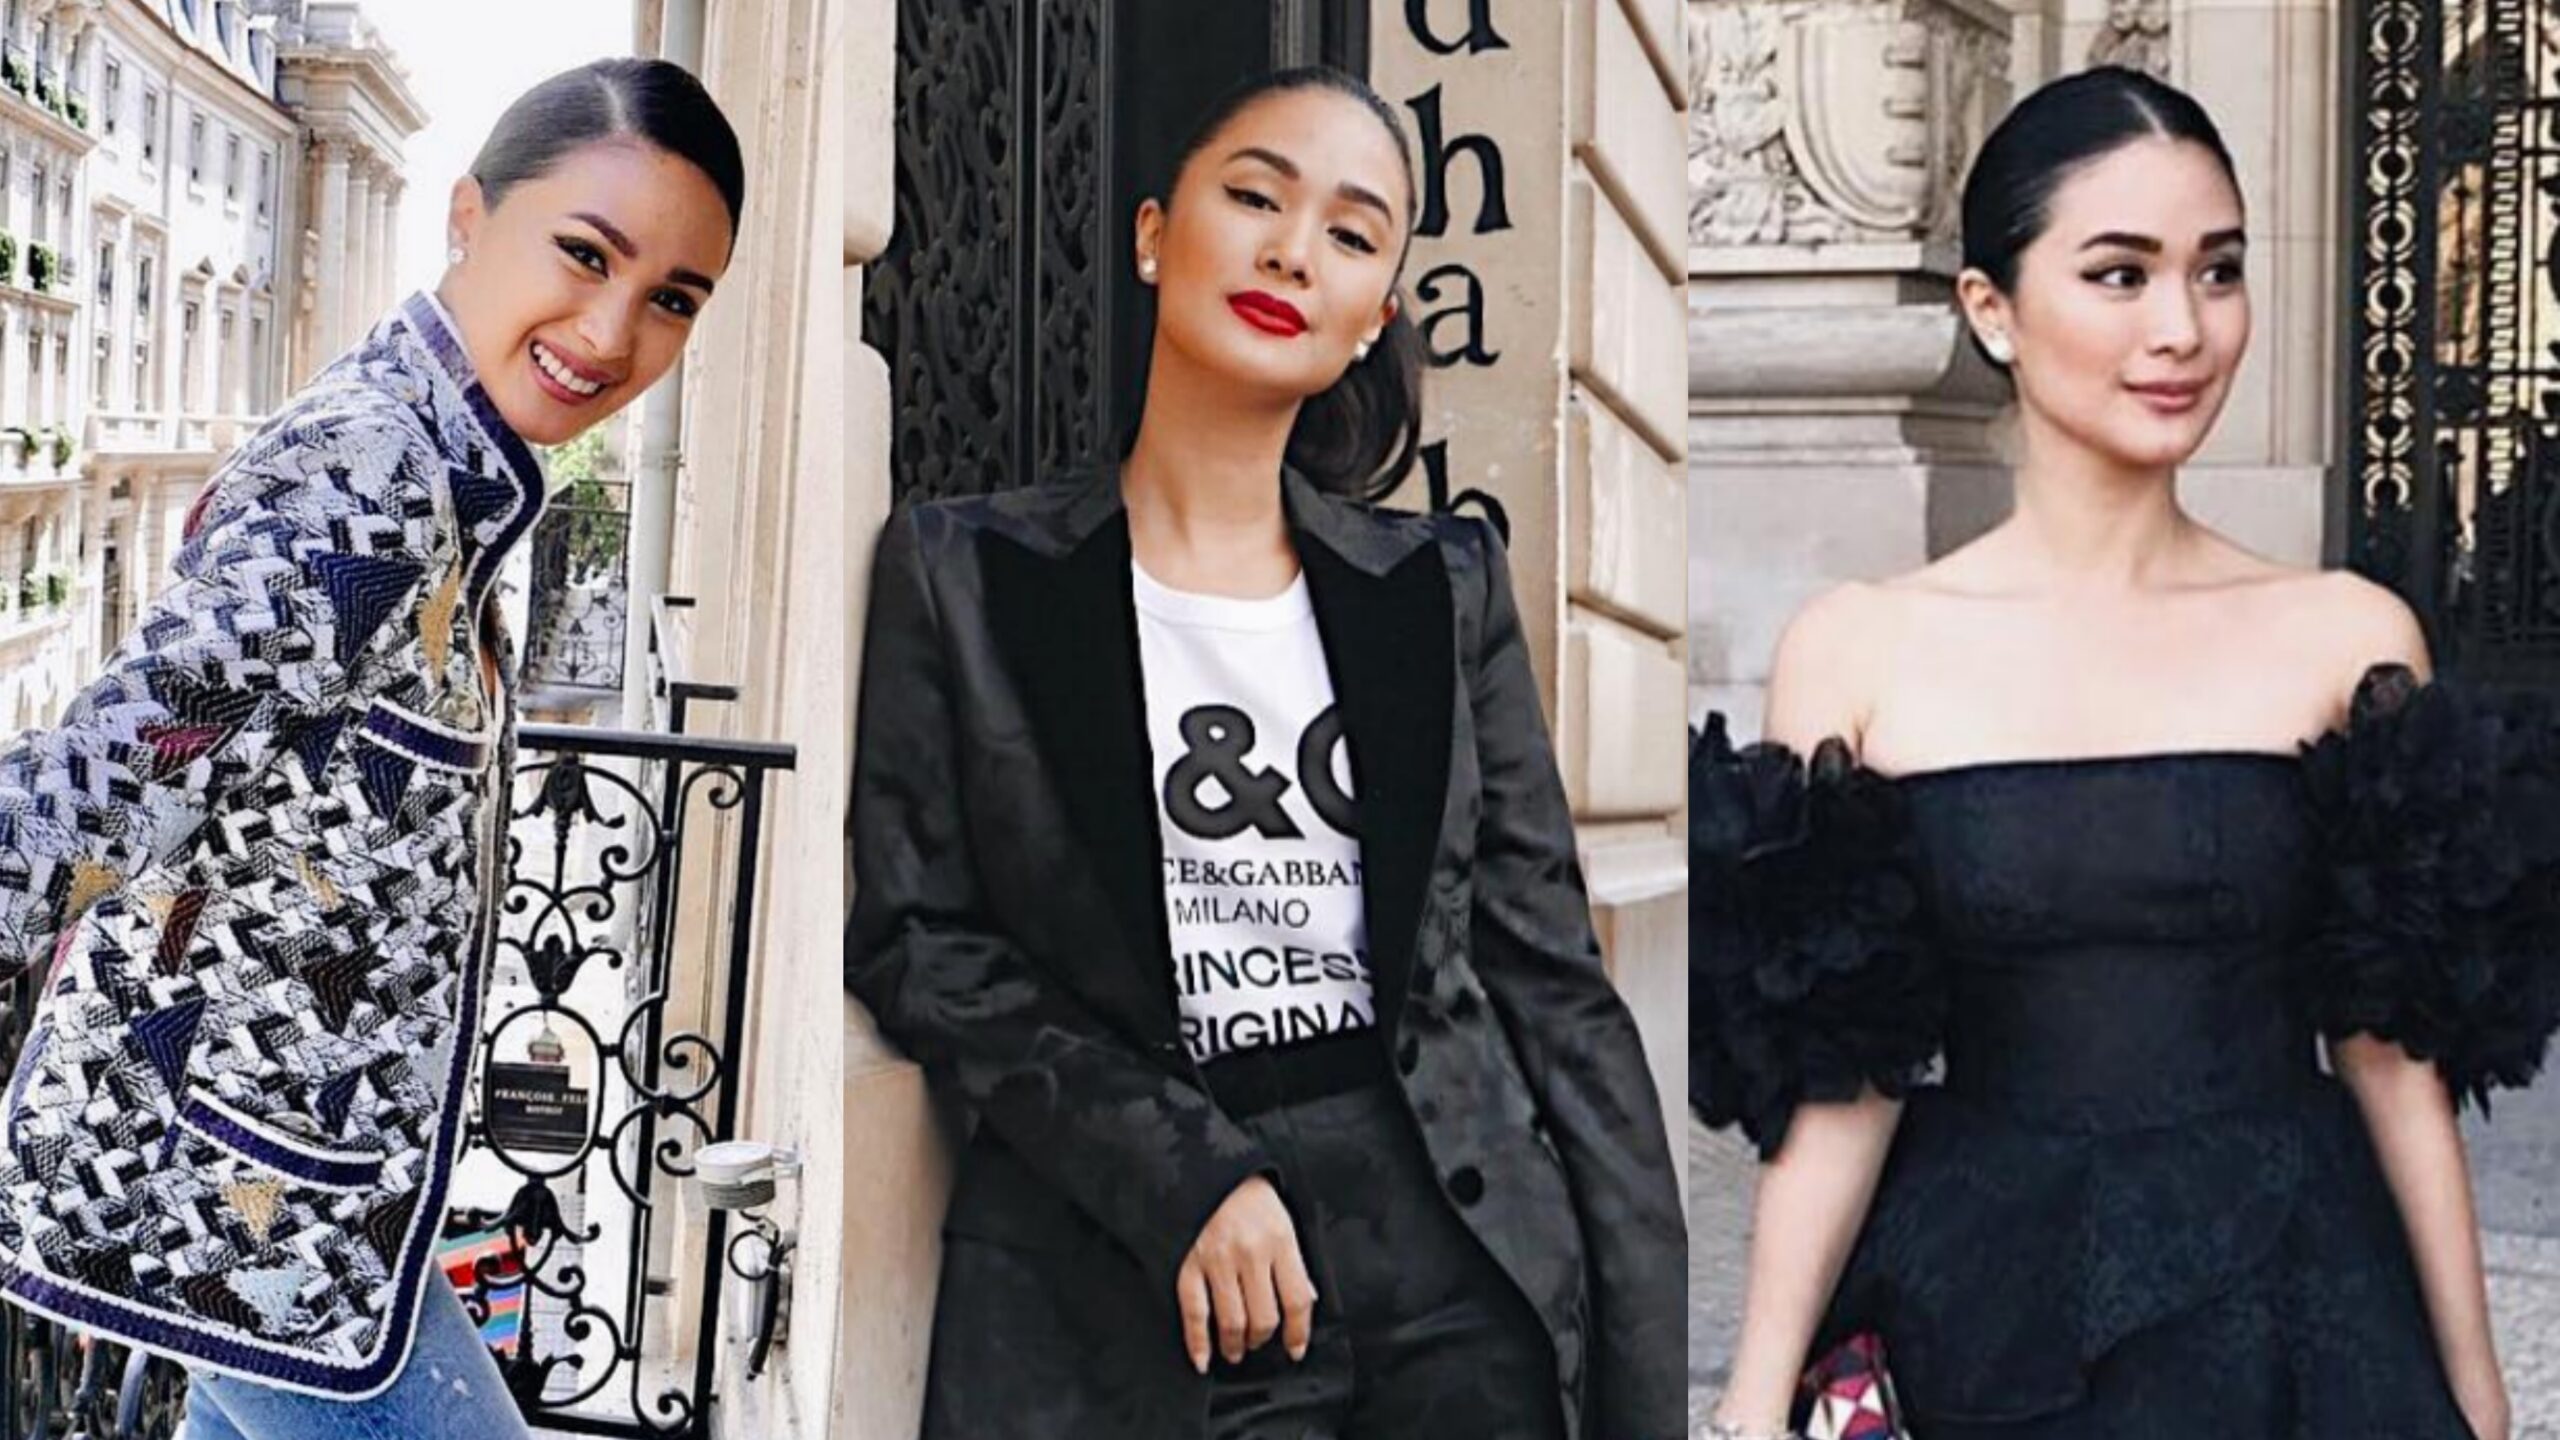 Mark Bumgarner releases sketch of Heart Evangelista's head-turning Paris  Fashion Week outfit